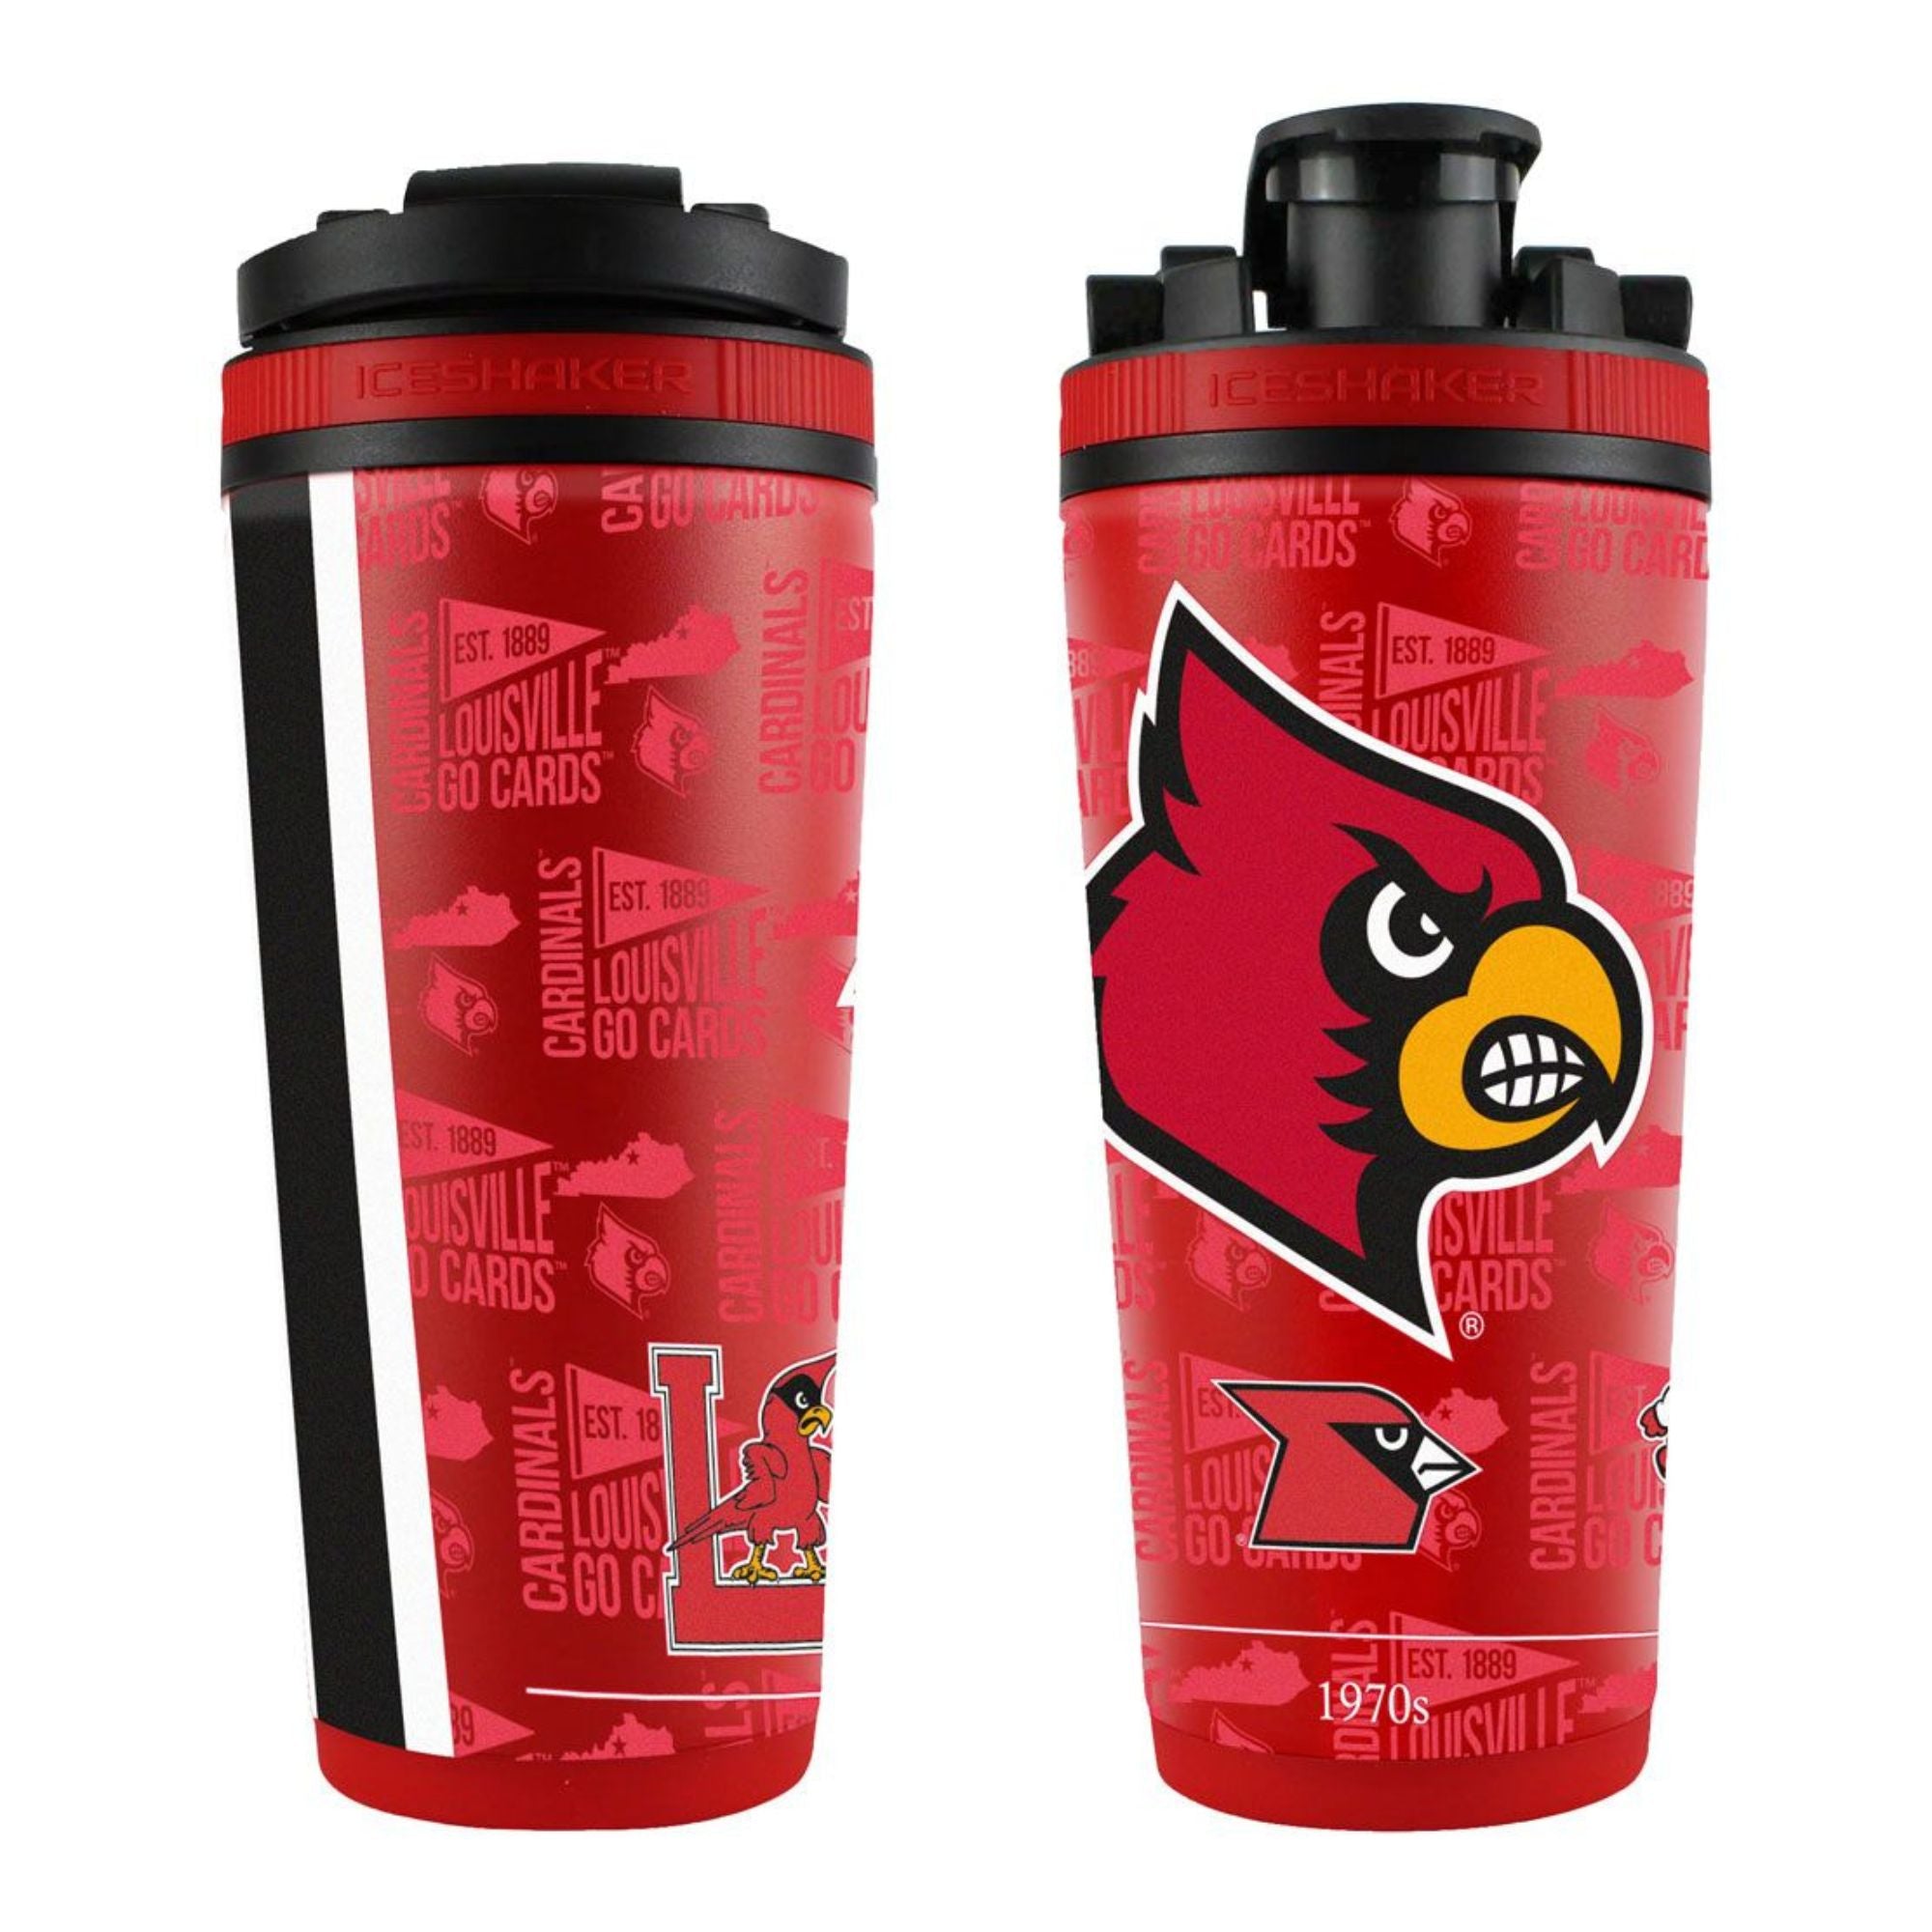 Officially Licensed University of Louisville 4D Ice Shaker